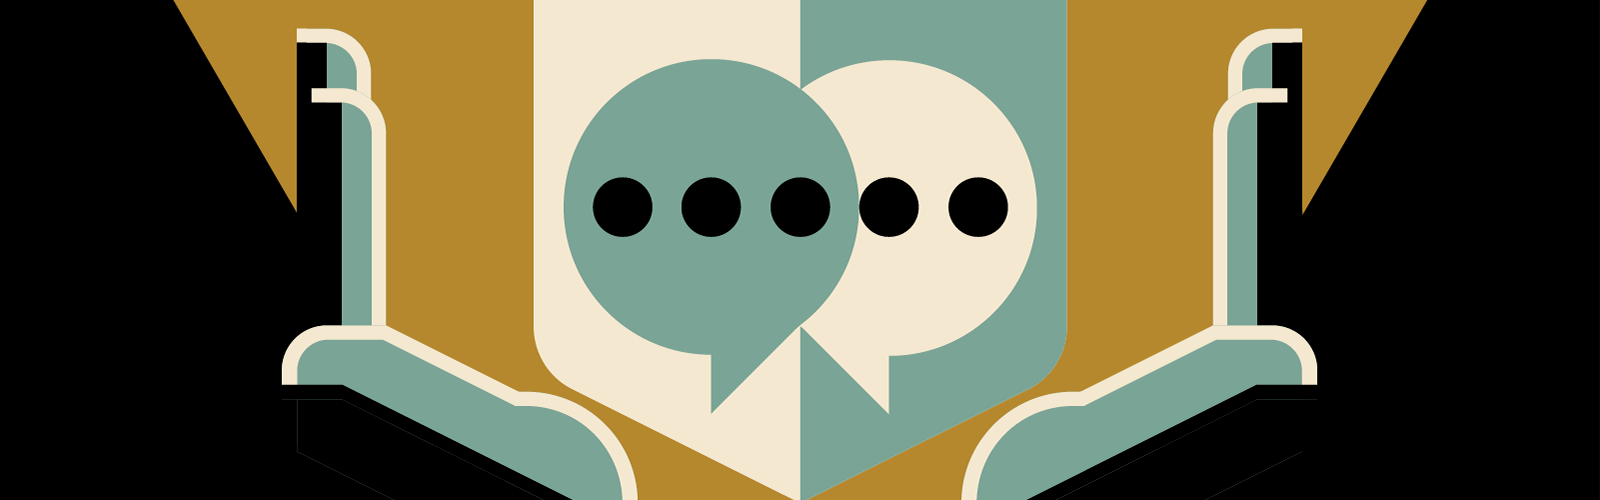 Graphic illustration of two hands held up around two overlapping speech bubbles